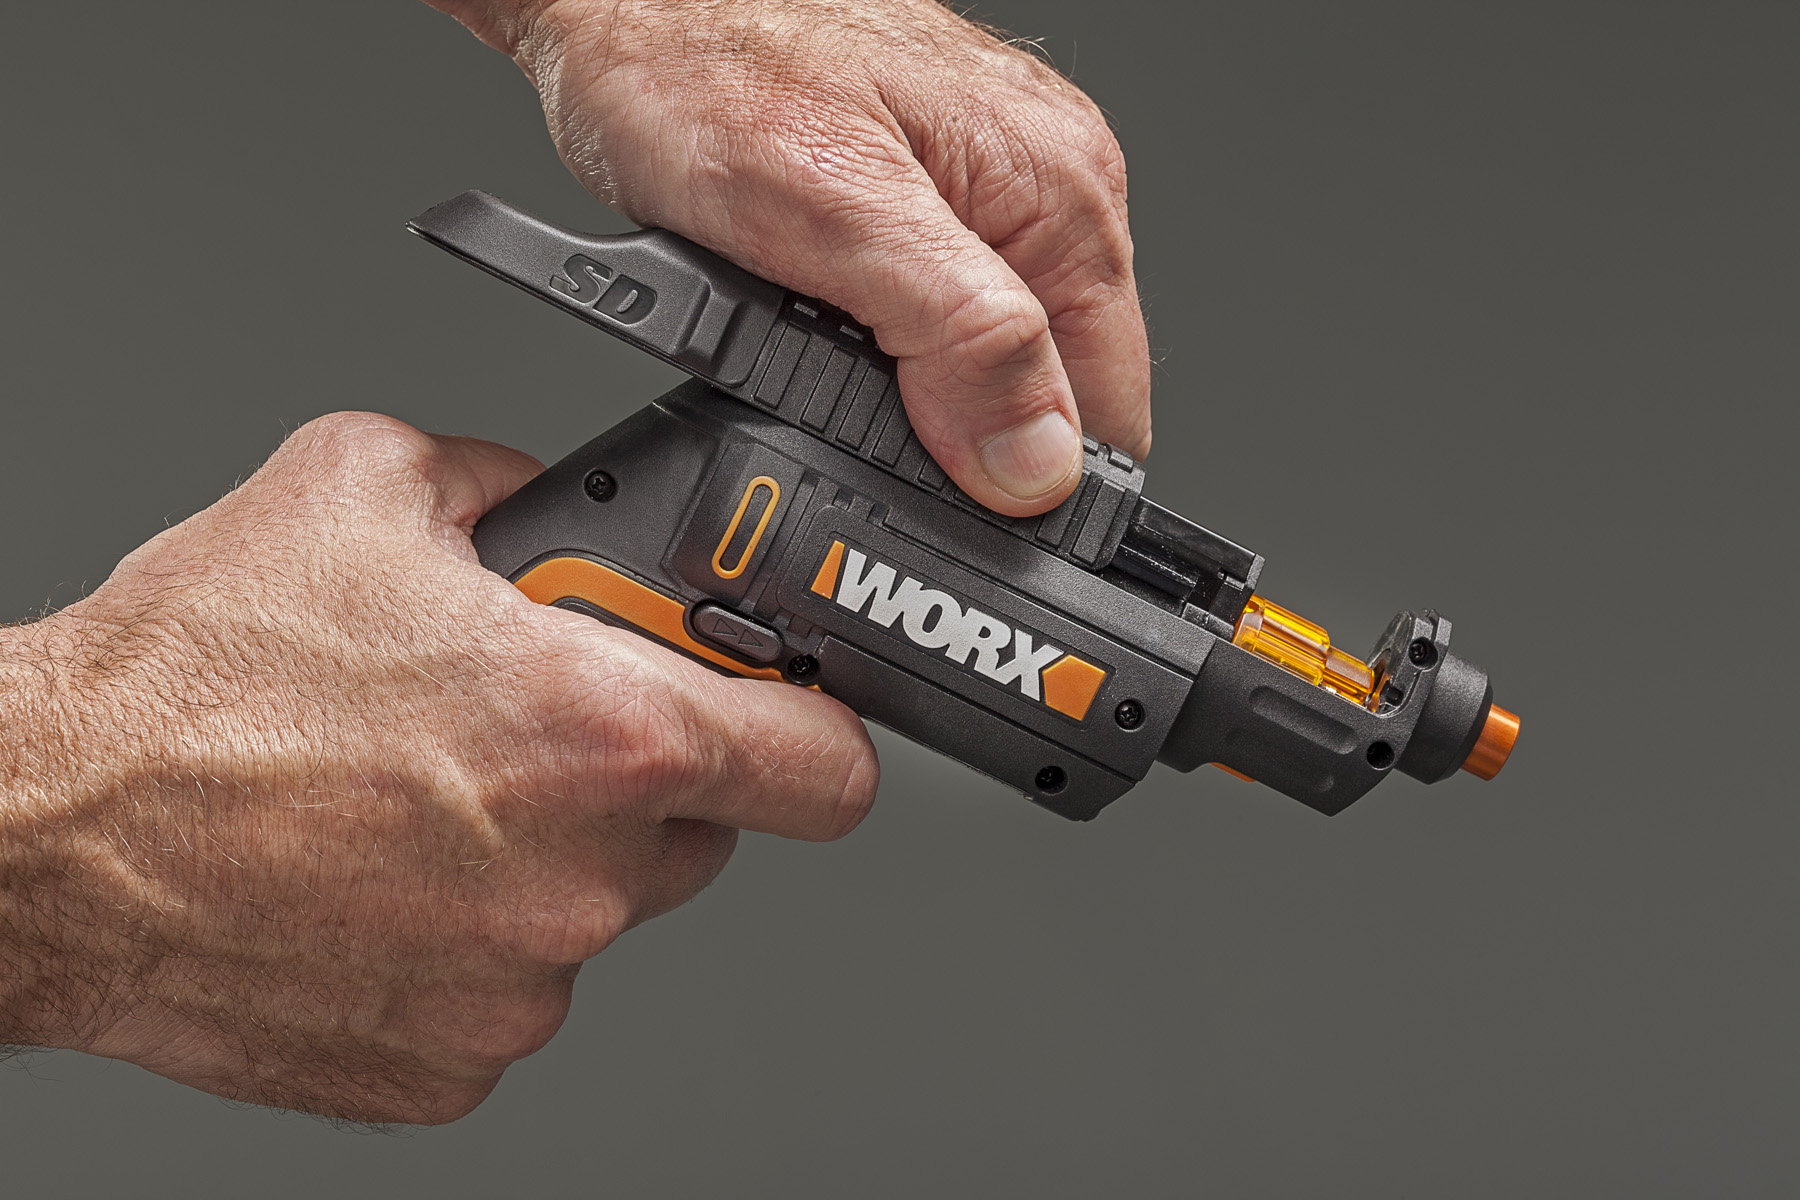 WORX SD SemiAutomatic Driver is powered by lithium-ion battery.